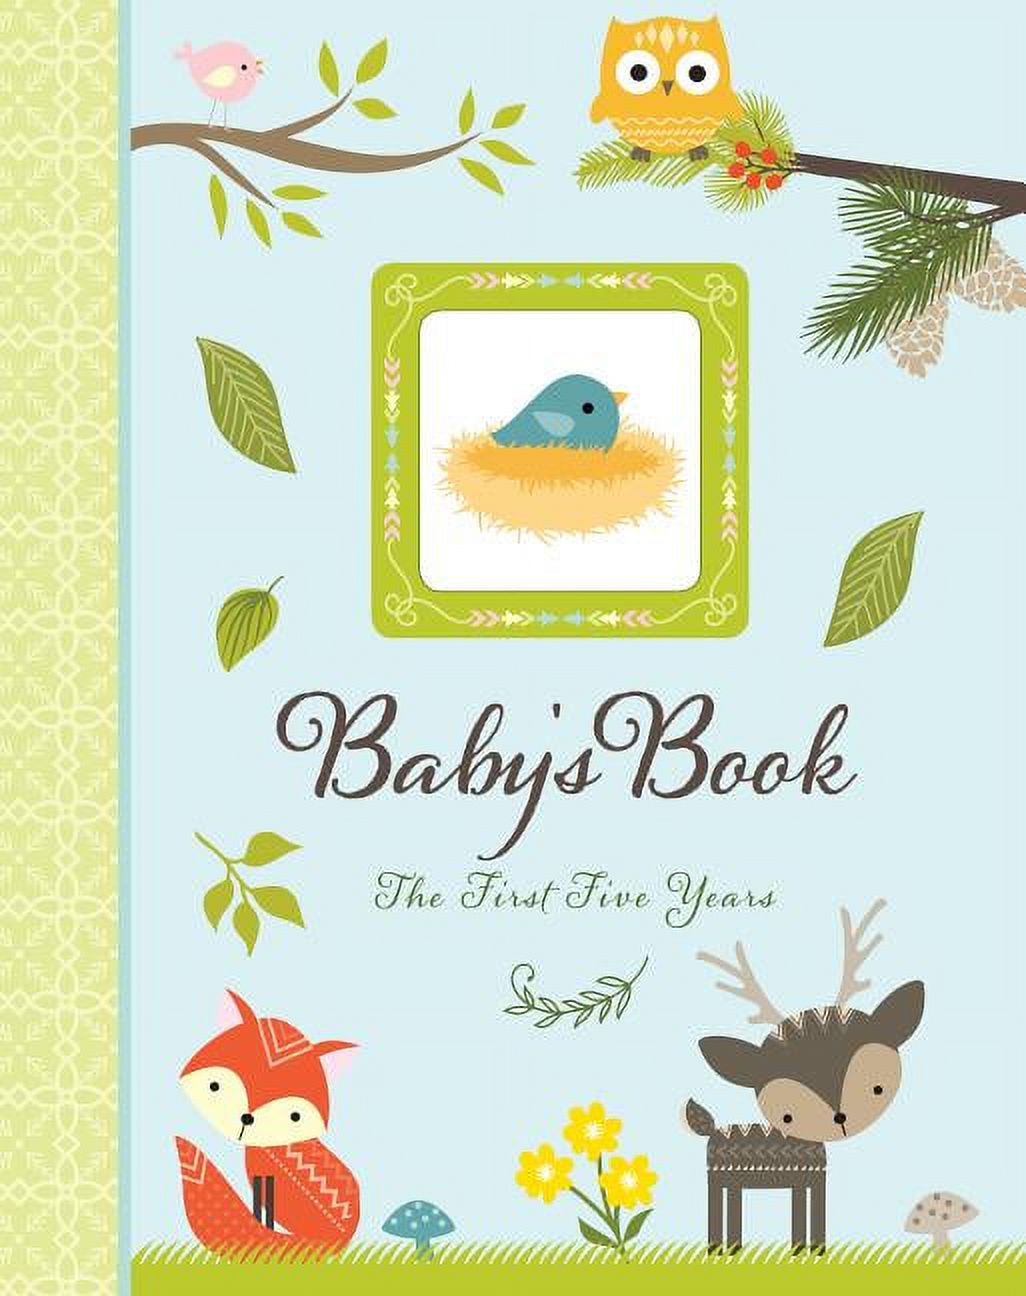 Woodland Friends Baby's Book: The First Five Years (Hardcover) - image 1 of 1